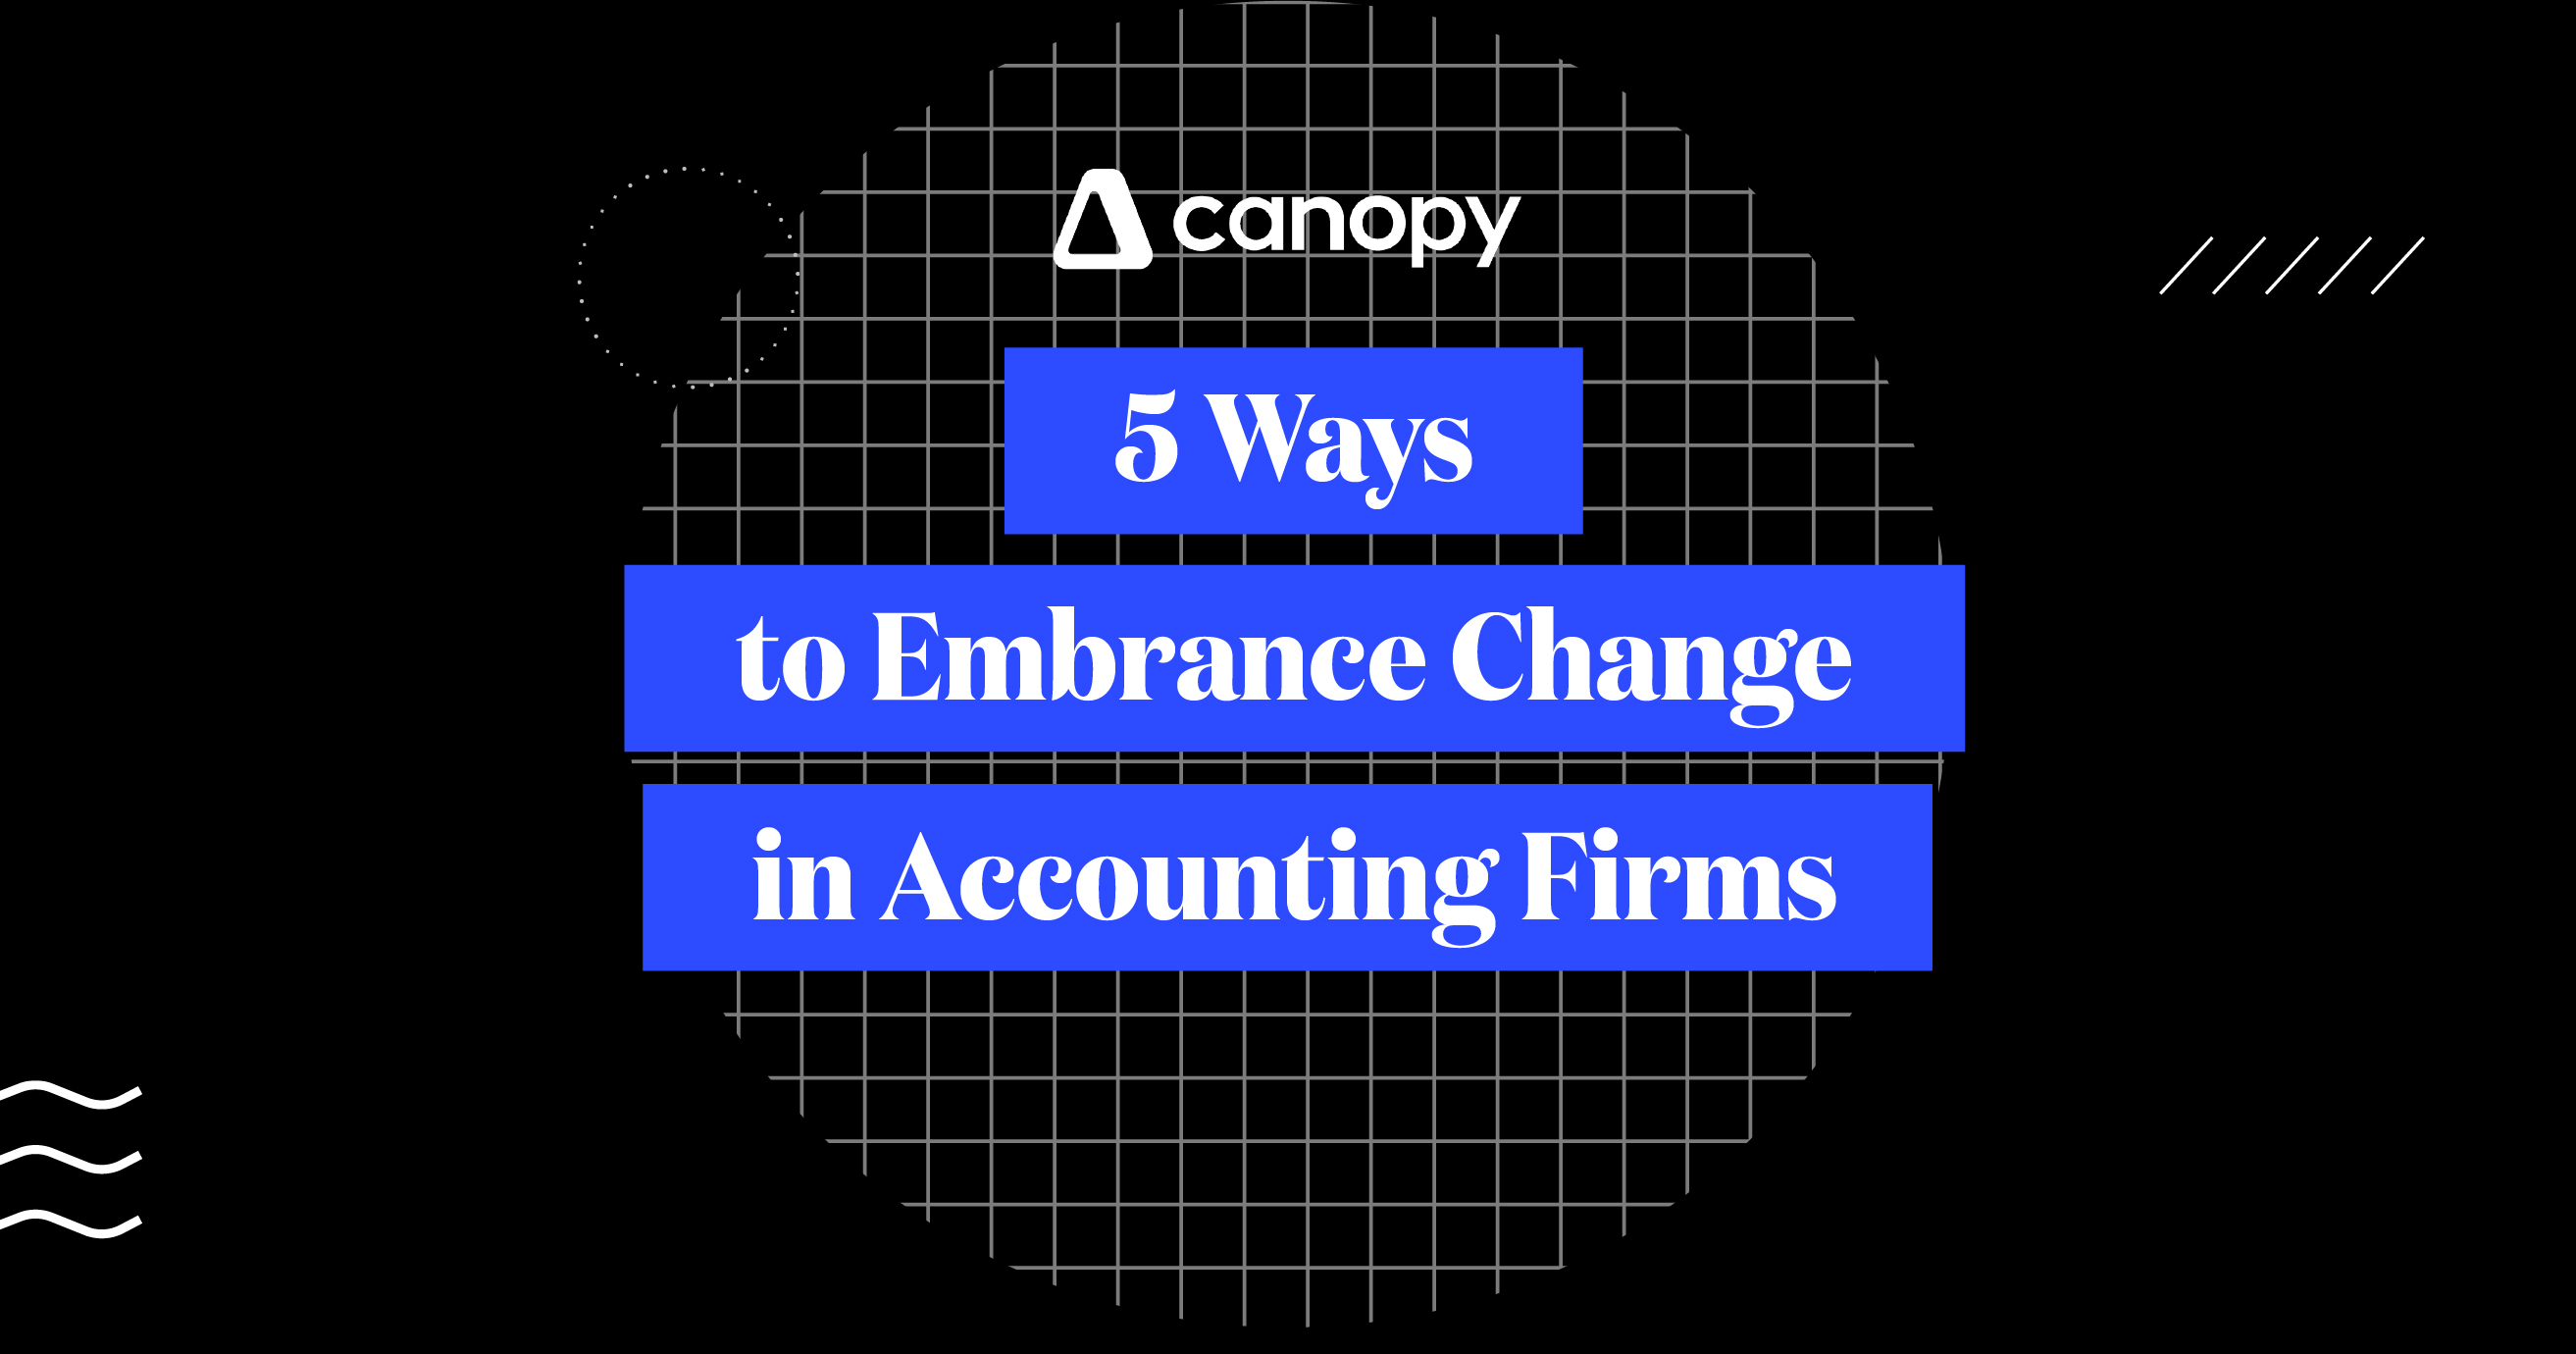 5 Ways to Embrace Change in Accounting Firms